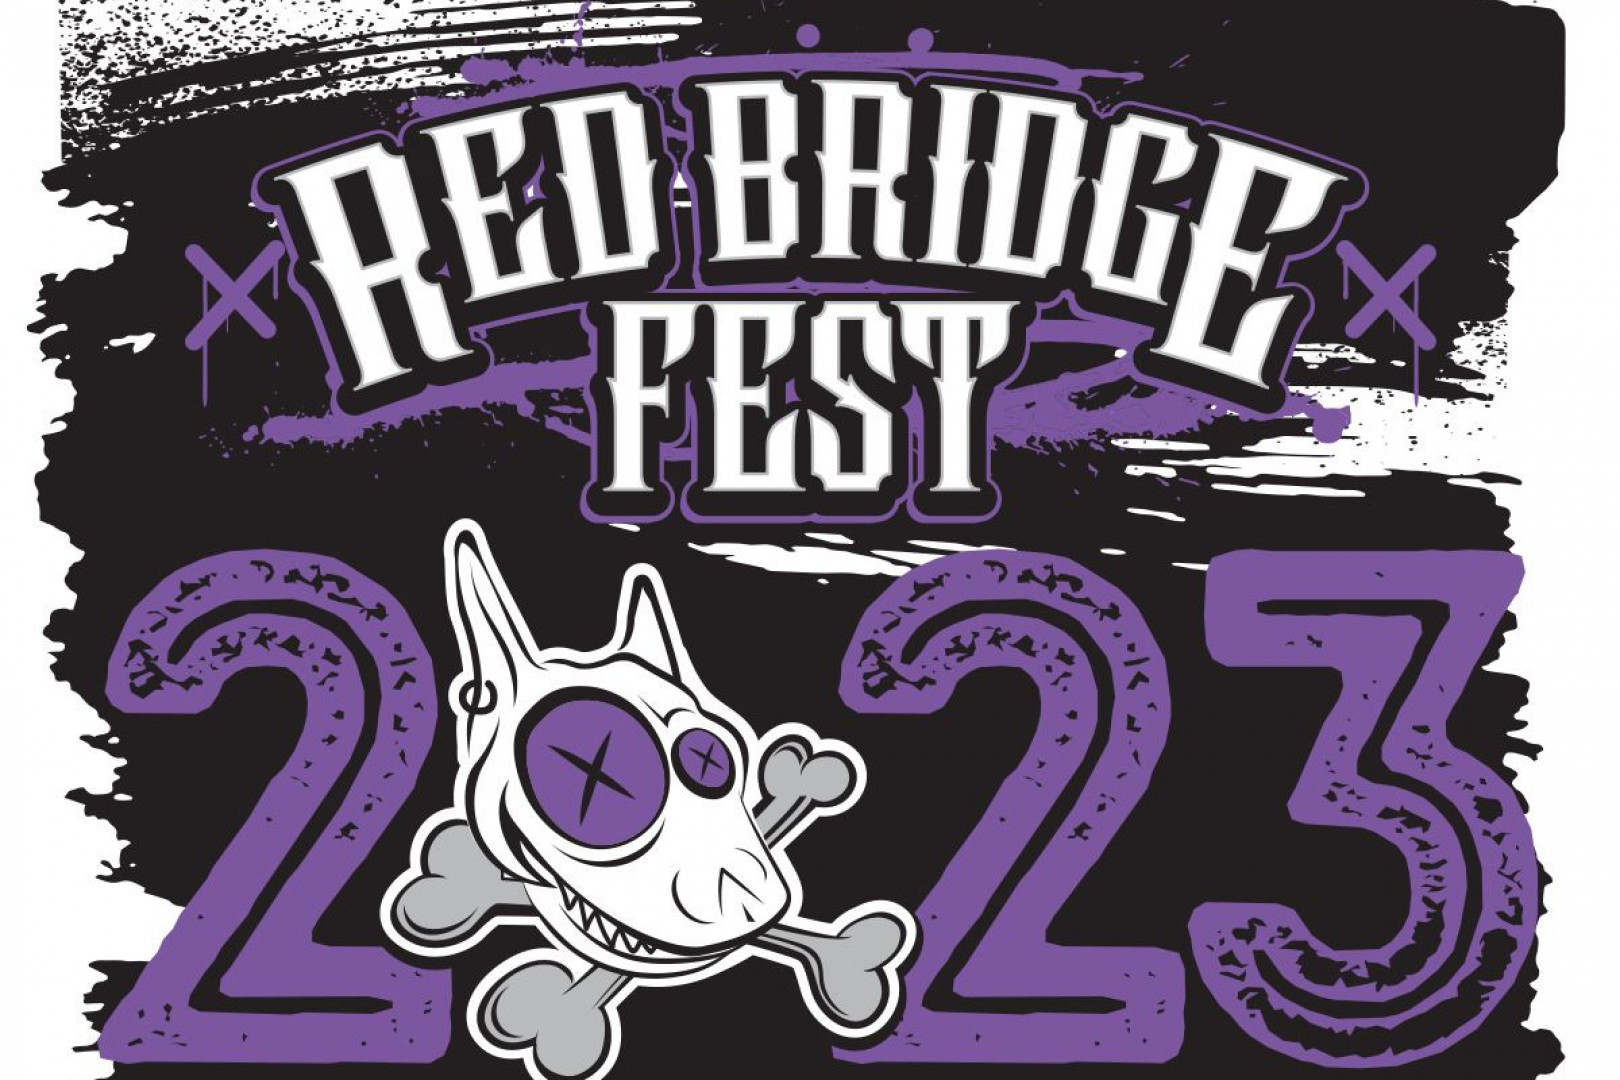 Red Bridge Fest announce the first two bands of their 2023 fest